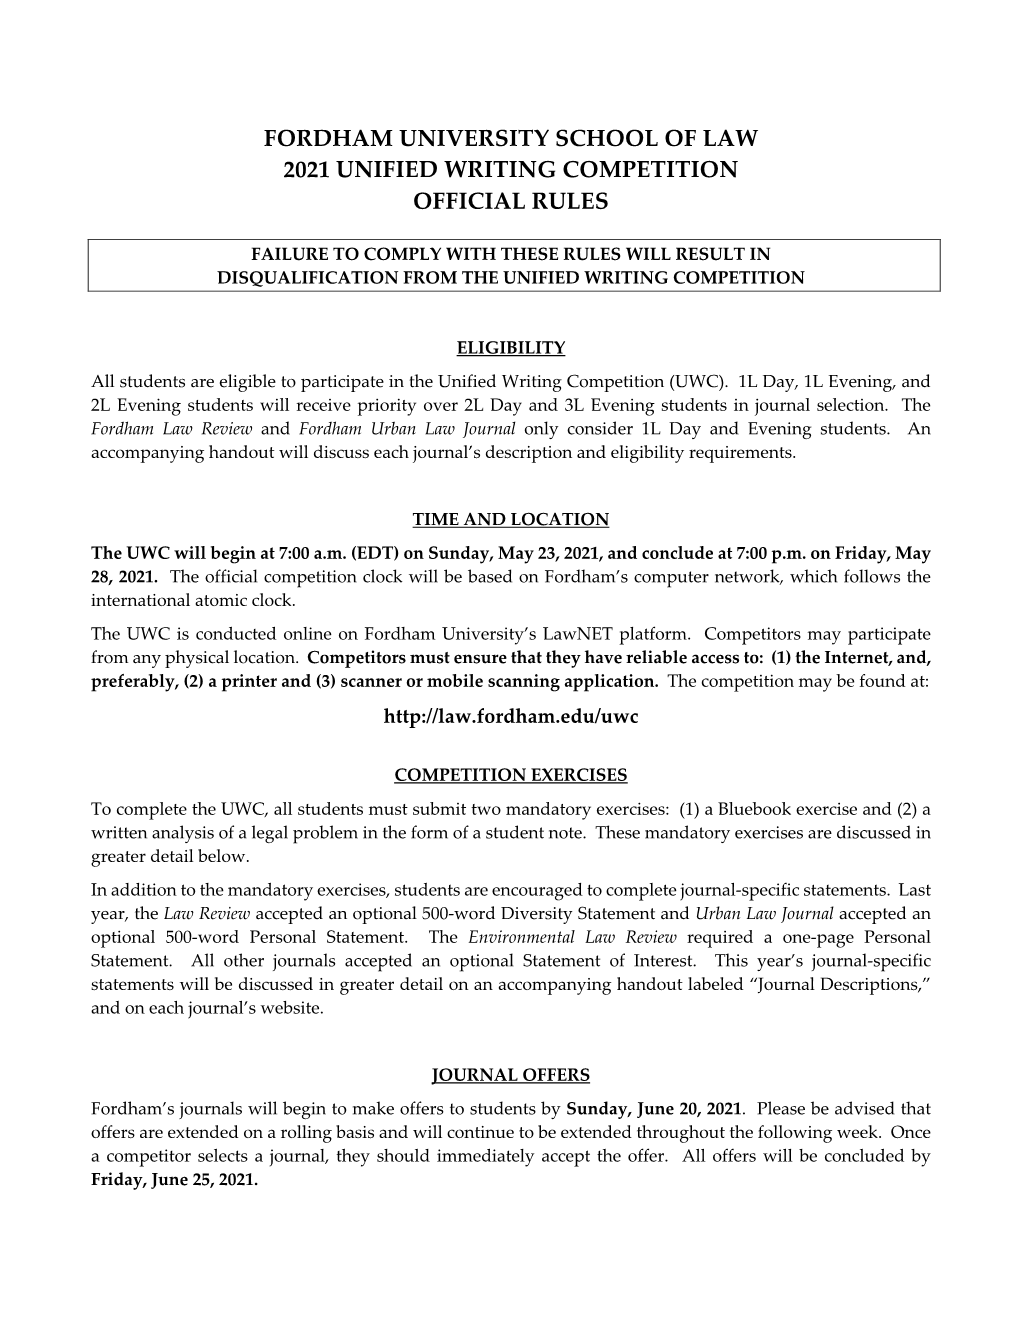 Fordham University School of Law 2021 Unified Writing Competition Official Rules